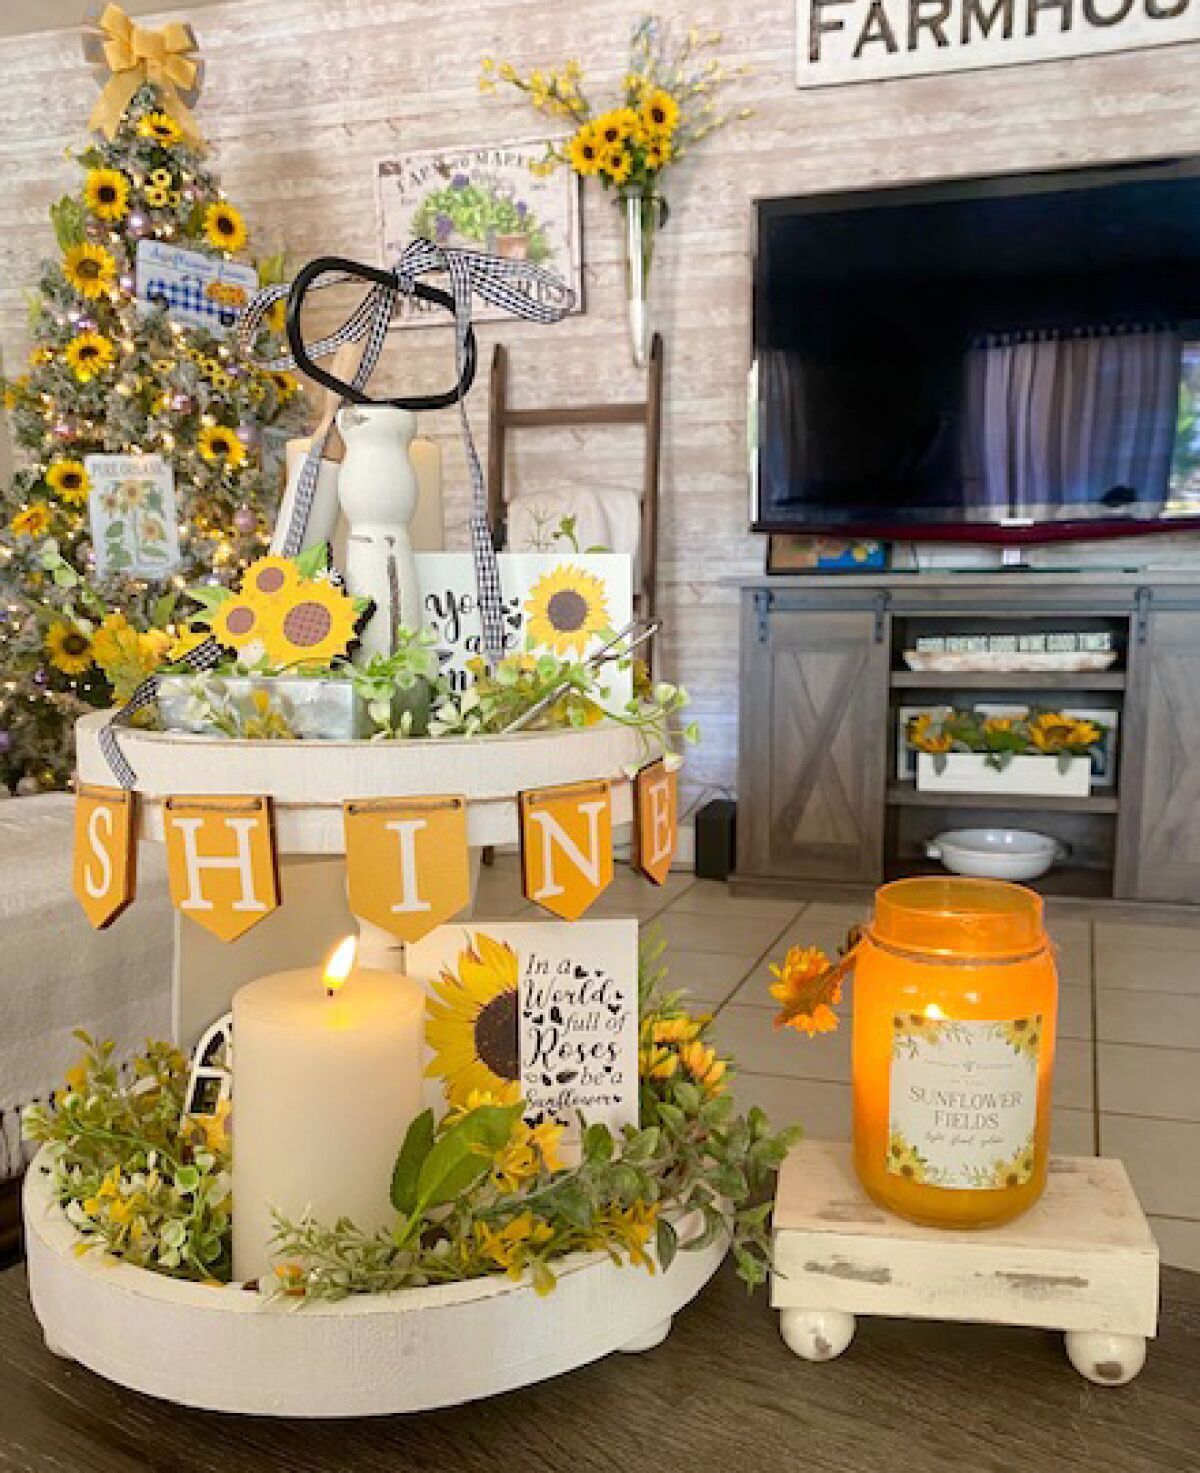 This Rustic Interiors display features a sunflower summer theme.